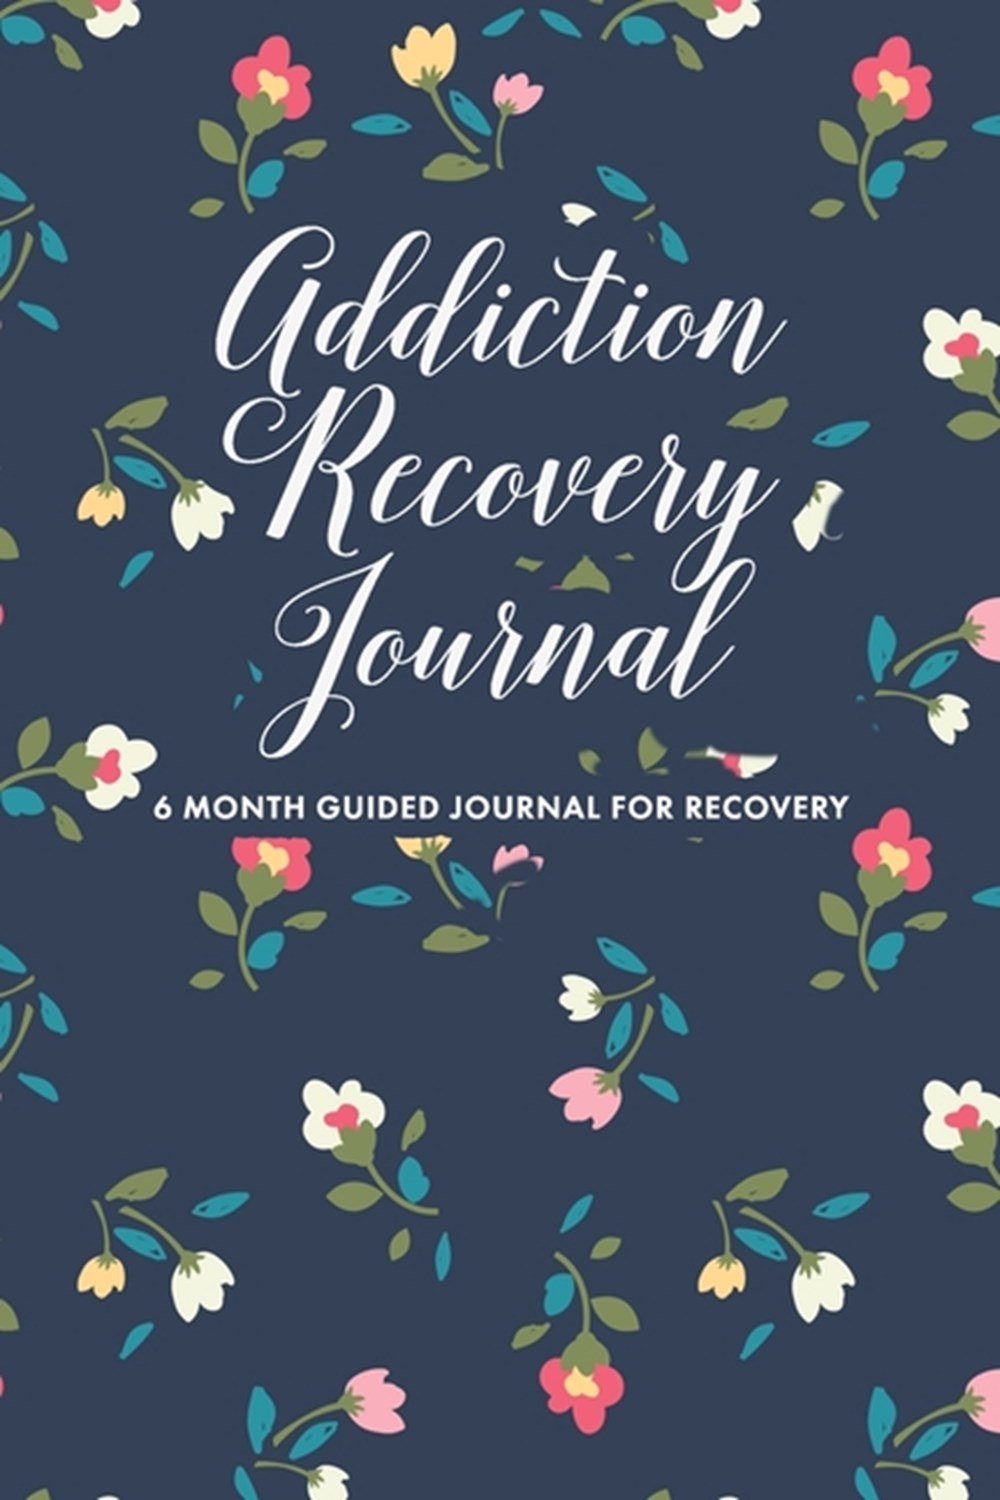 Addiction Recovery Journal 180 Daily Entries to Log Your Feelings, Goals, and Gratefulness + Page fo